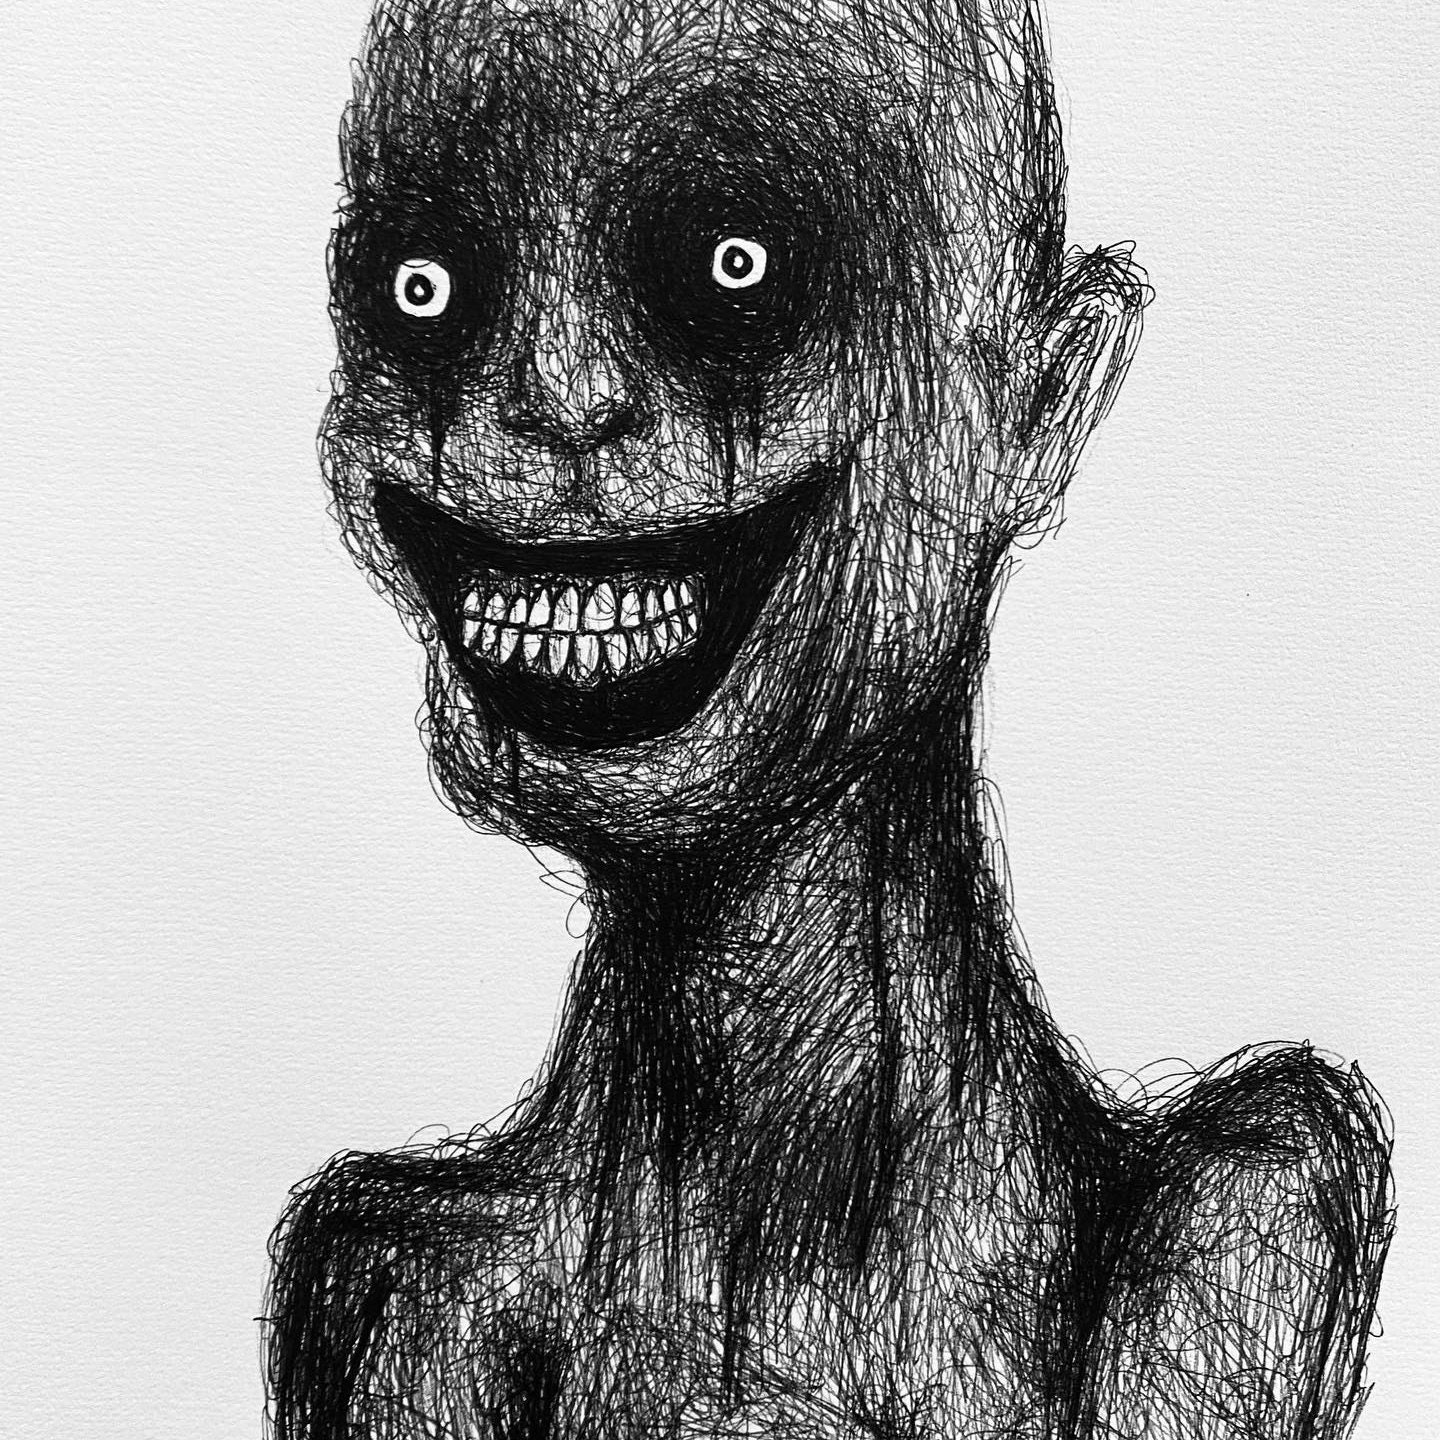 Tried to draw something unsettling/scary for the first time